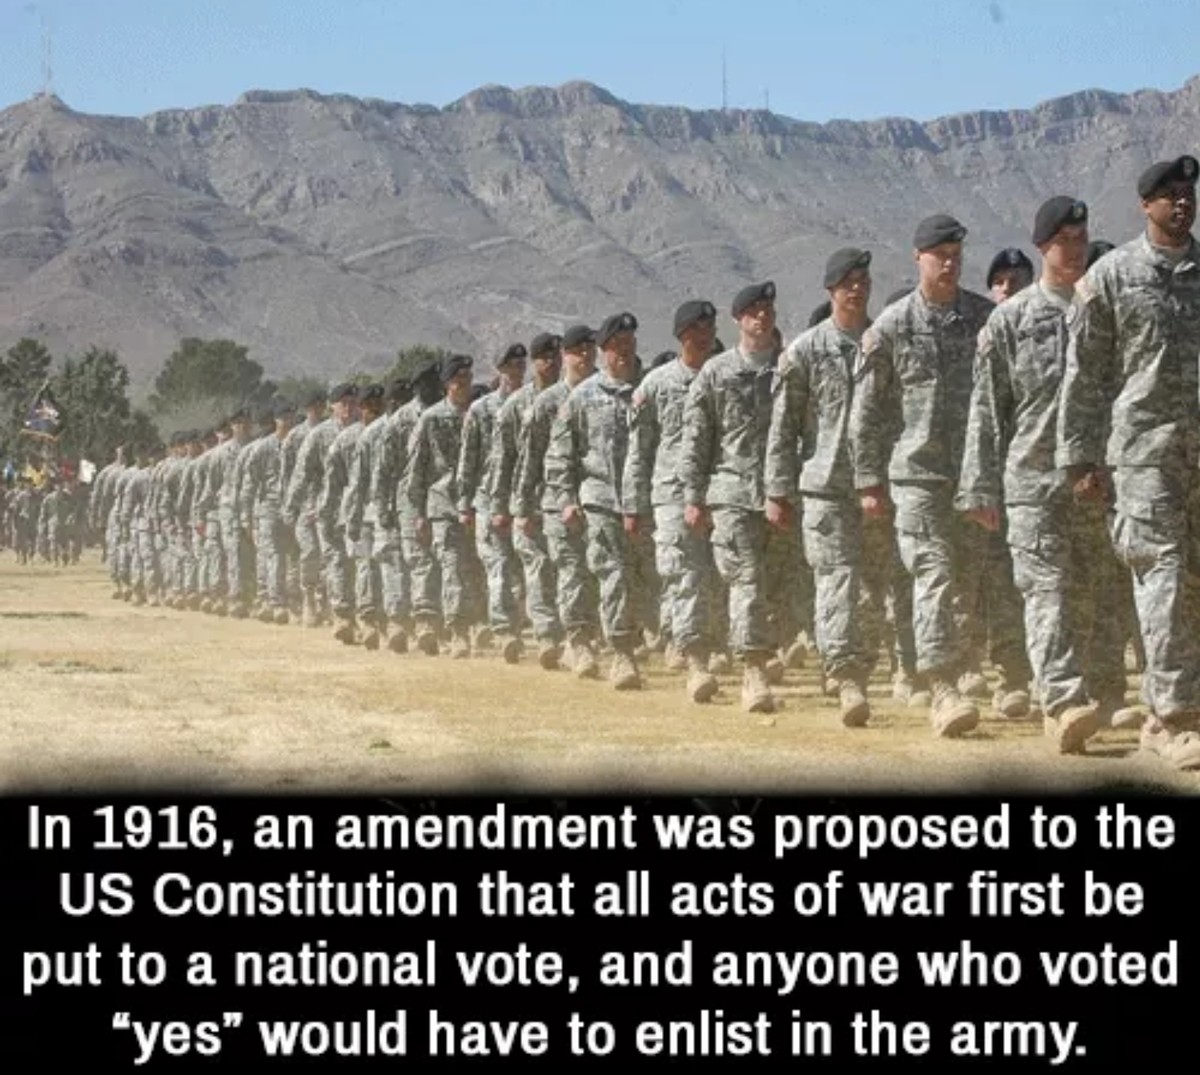 fort bliss texas - In 1916, an amendment was proposed to the Us Constitution that all acts of war first be put to a national vote, and anyone who voted "yes" would have to enlist in the army.